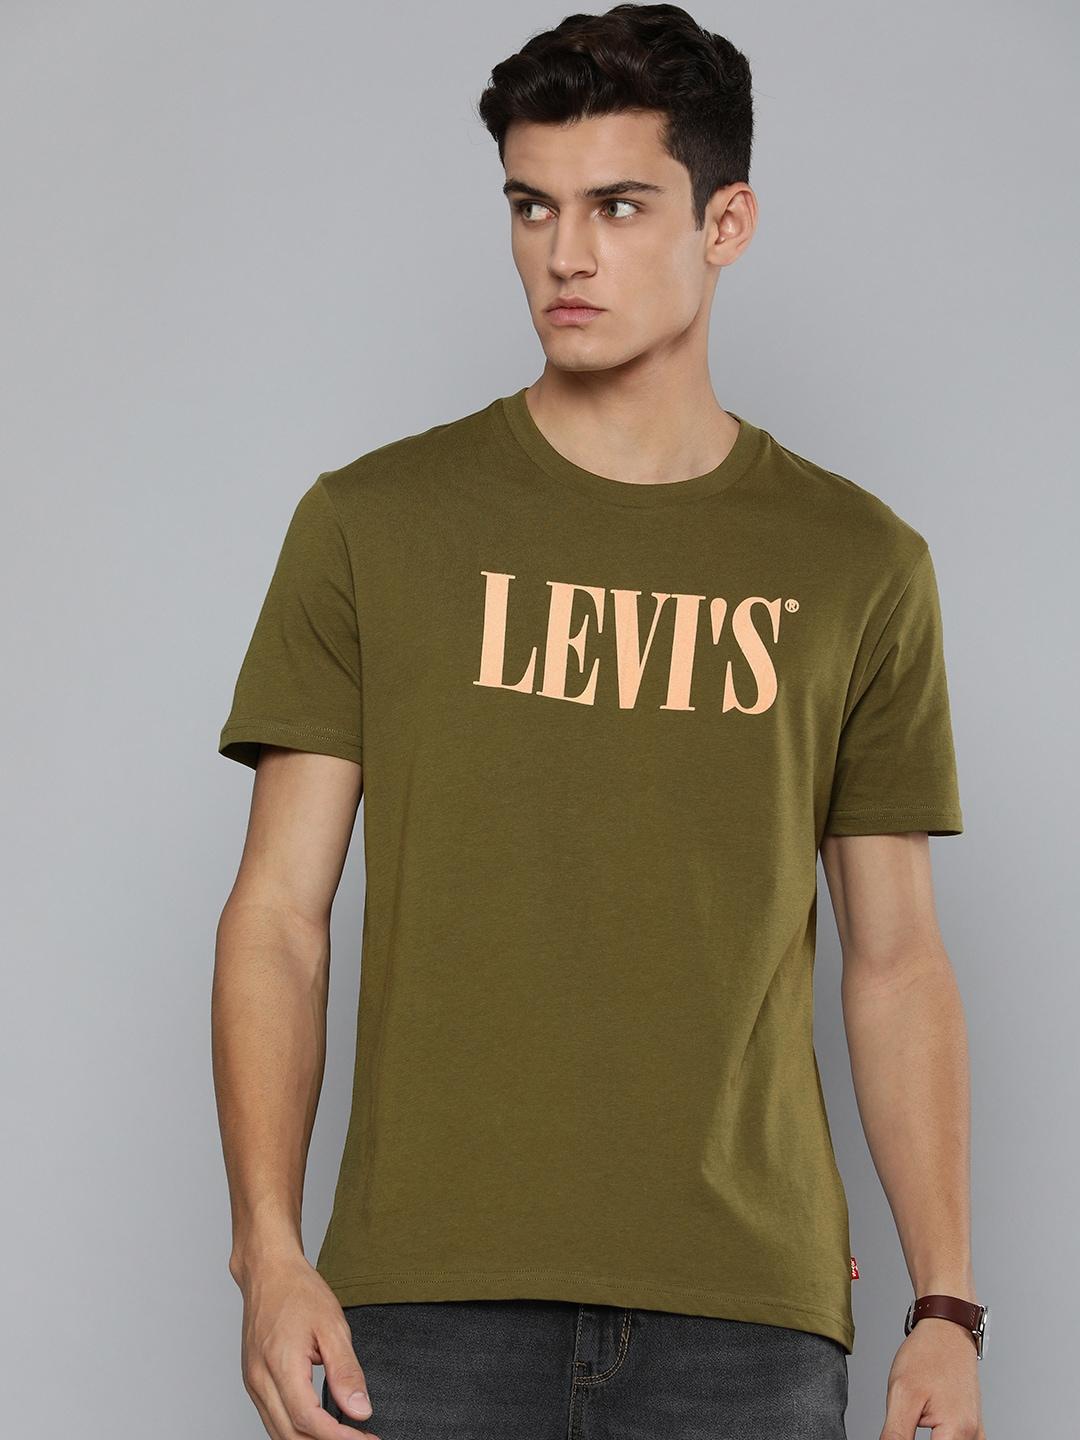 levis men olive green typography printed pure cotton casual t-shirt